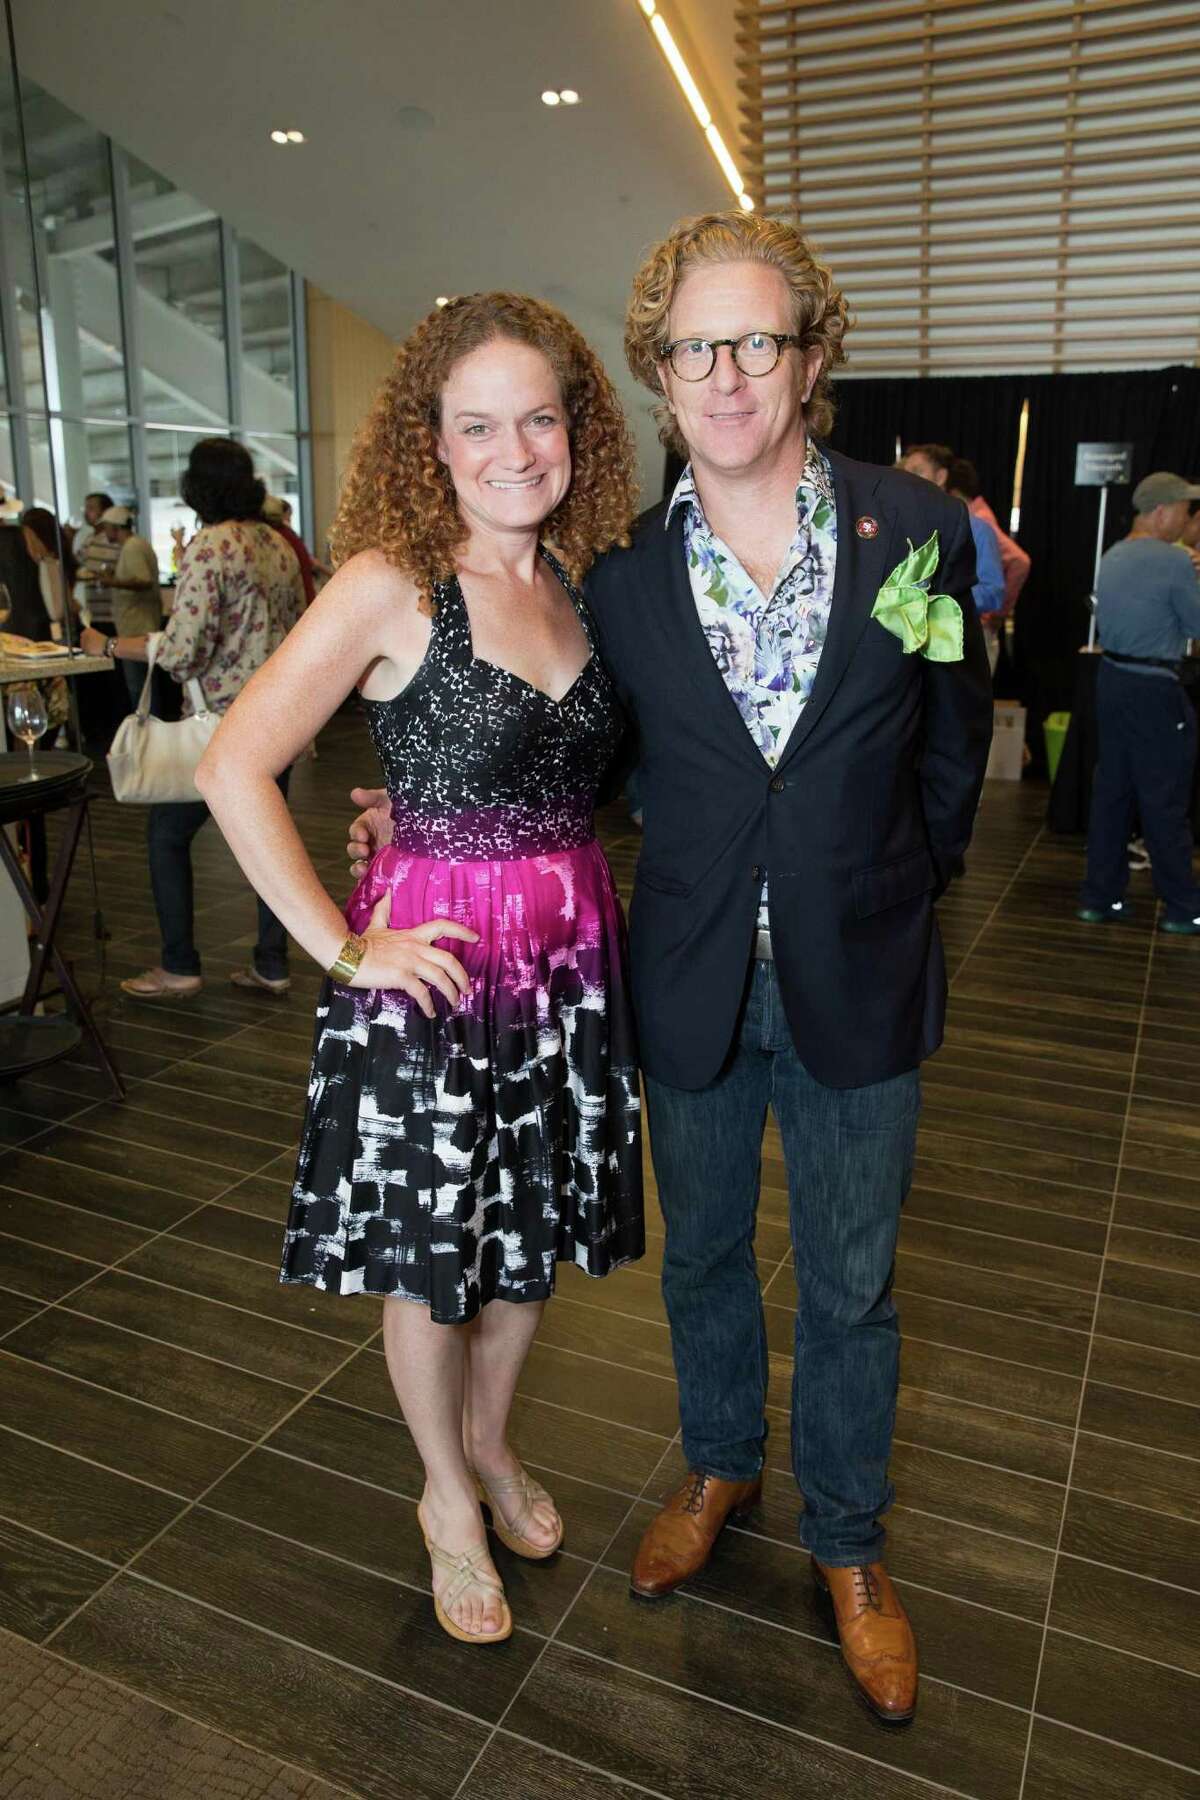 Joanne Pasternack and Clay Reynolds at the inaugural Silicon Valley Wine Auction on June 20, 2015.